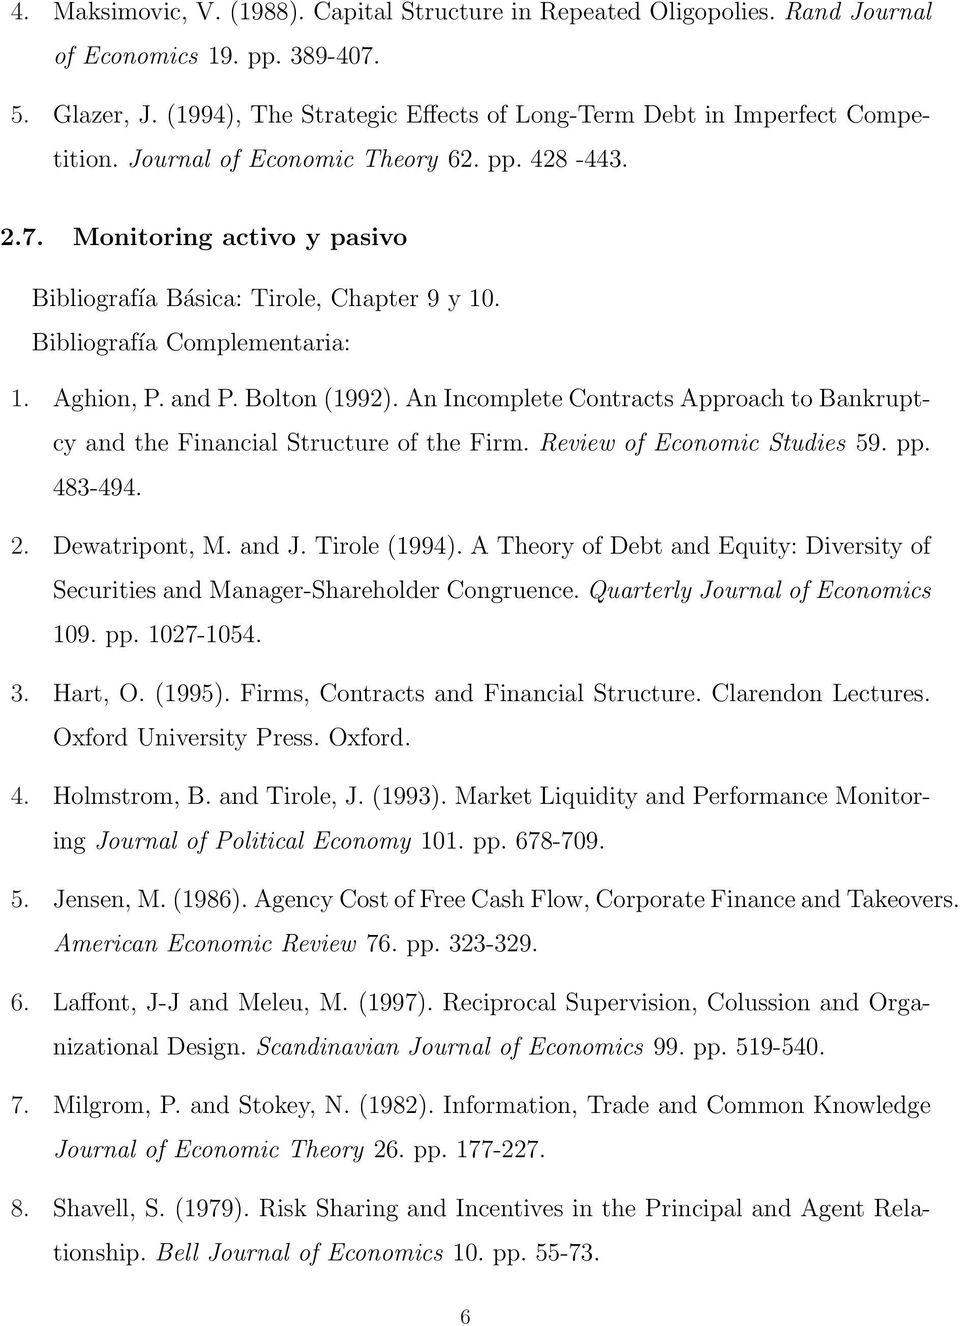 An Incomplete Contracts Approach to Bankruptcy and the Financial Structure of the Firm. Review of Economic Studies 59. pp. 483-494. 2. Dewatripont, M. and J. Tirole (1994).